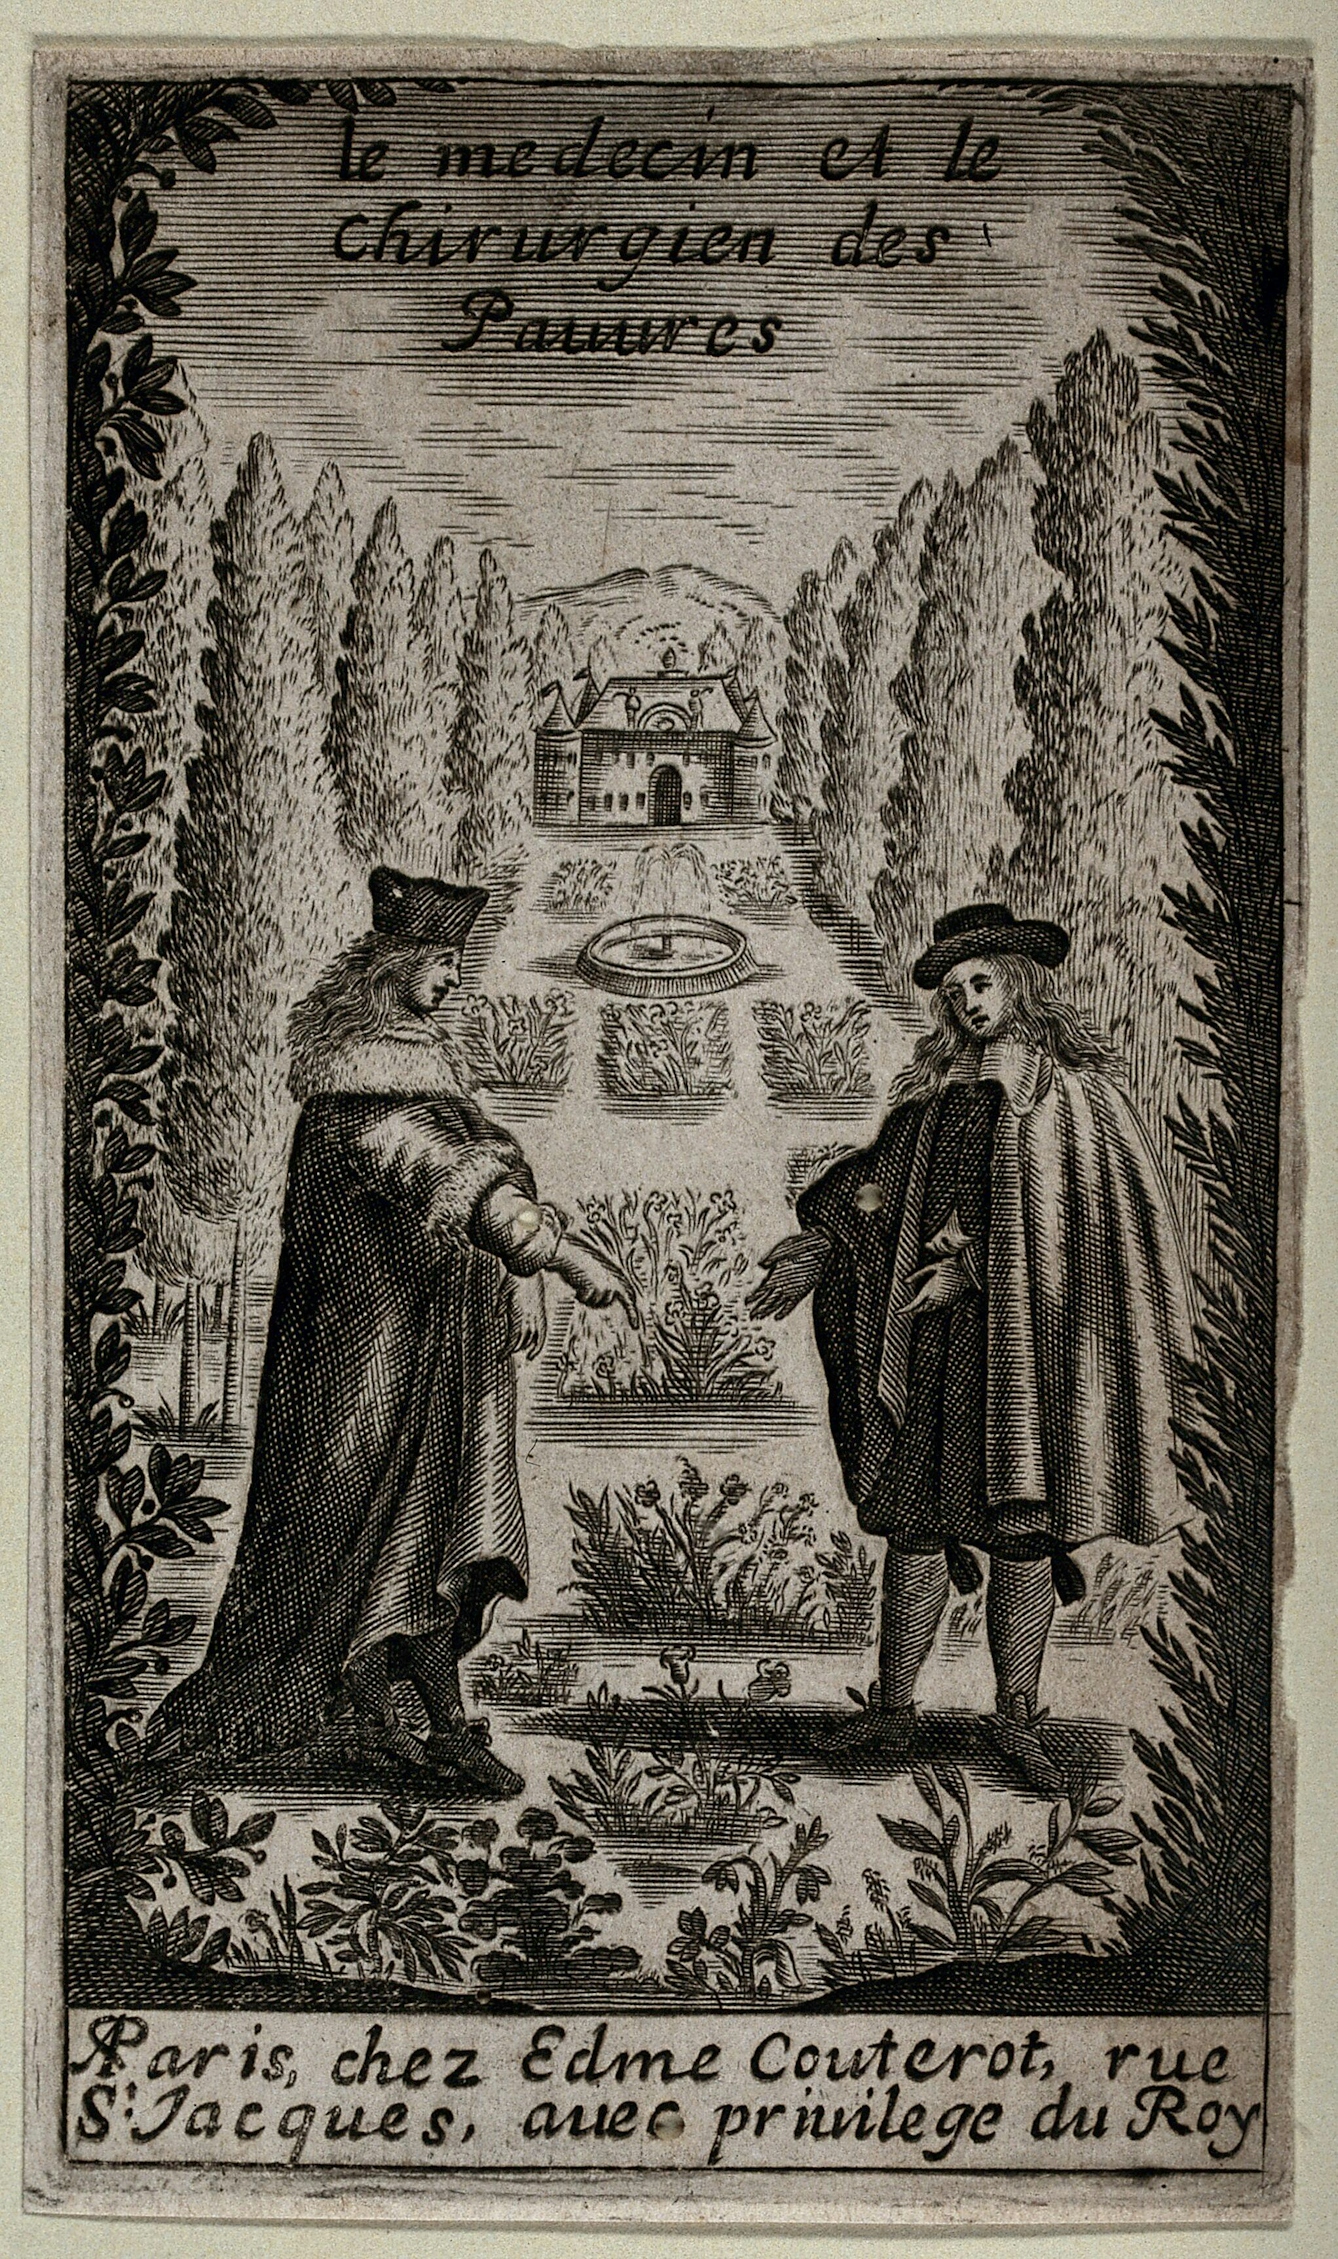 Black ink engraving showing a physician and a surgeon pointing to herbs in a herb garden,  indicating medicine and surgery for the poor.